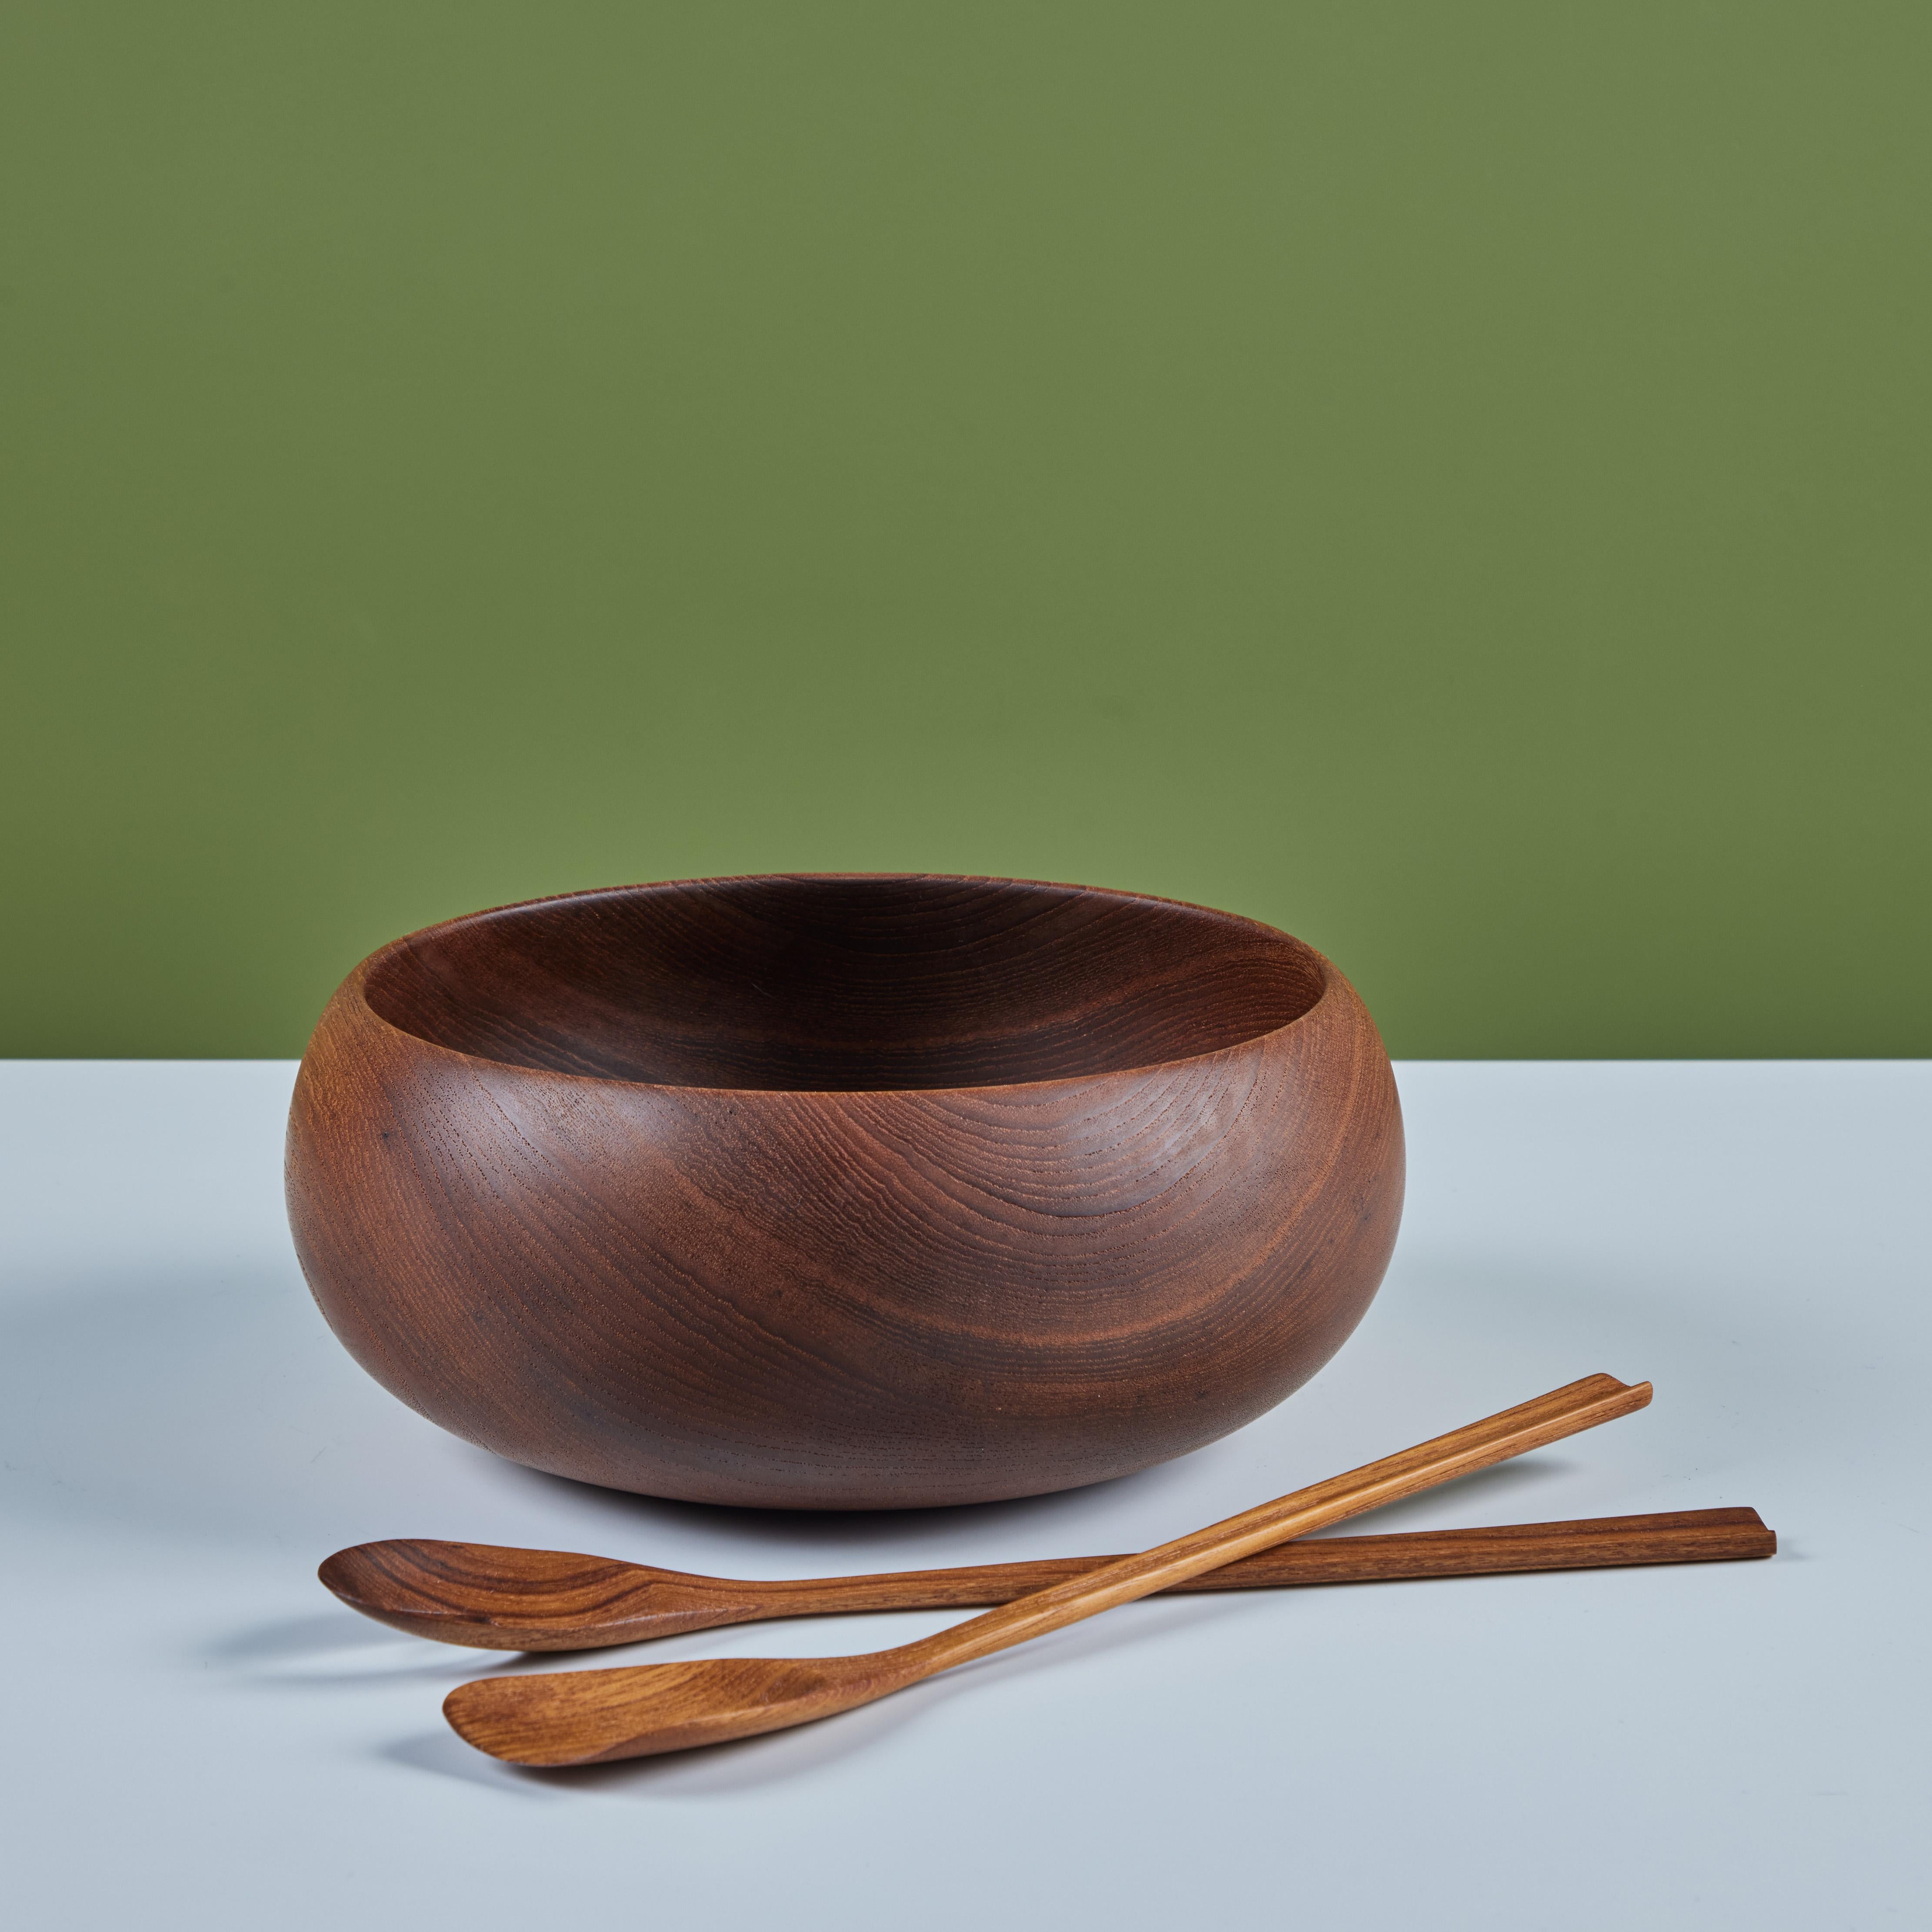 Wood Turned Bowl with Utensils For Sale 3